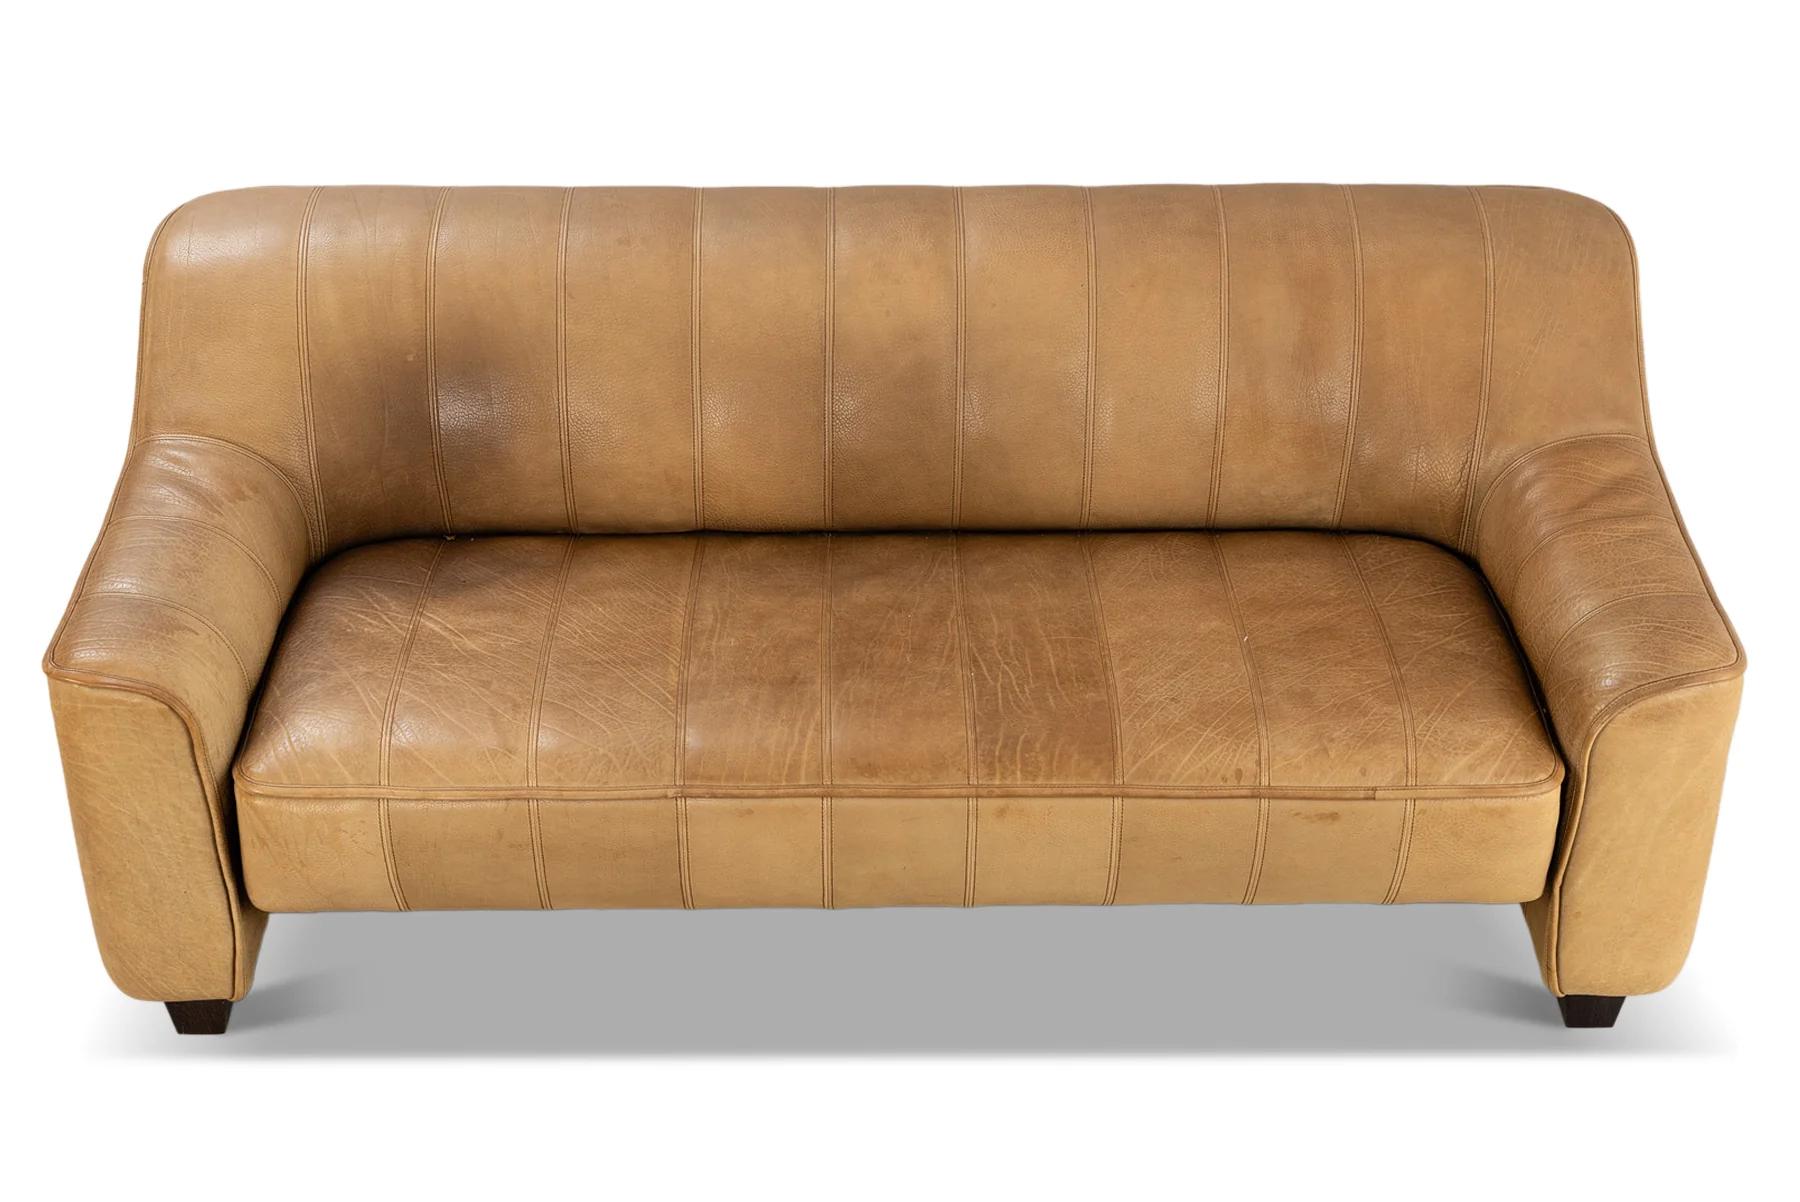 Ds 44 three seat sofa in buffalo leather by desede In Good Condition For Sale In Berkeley, CA